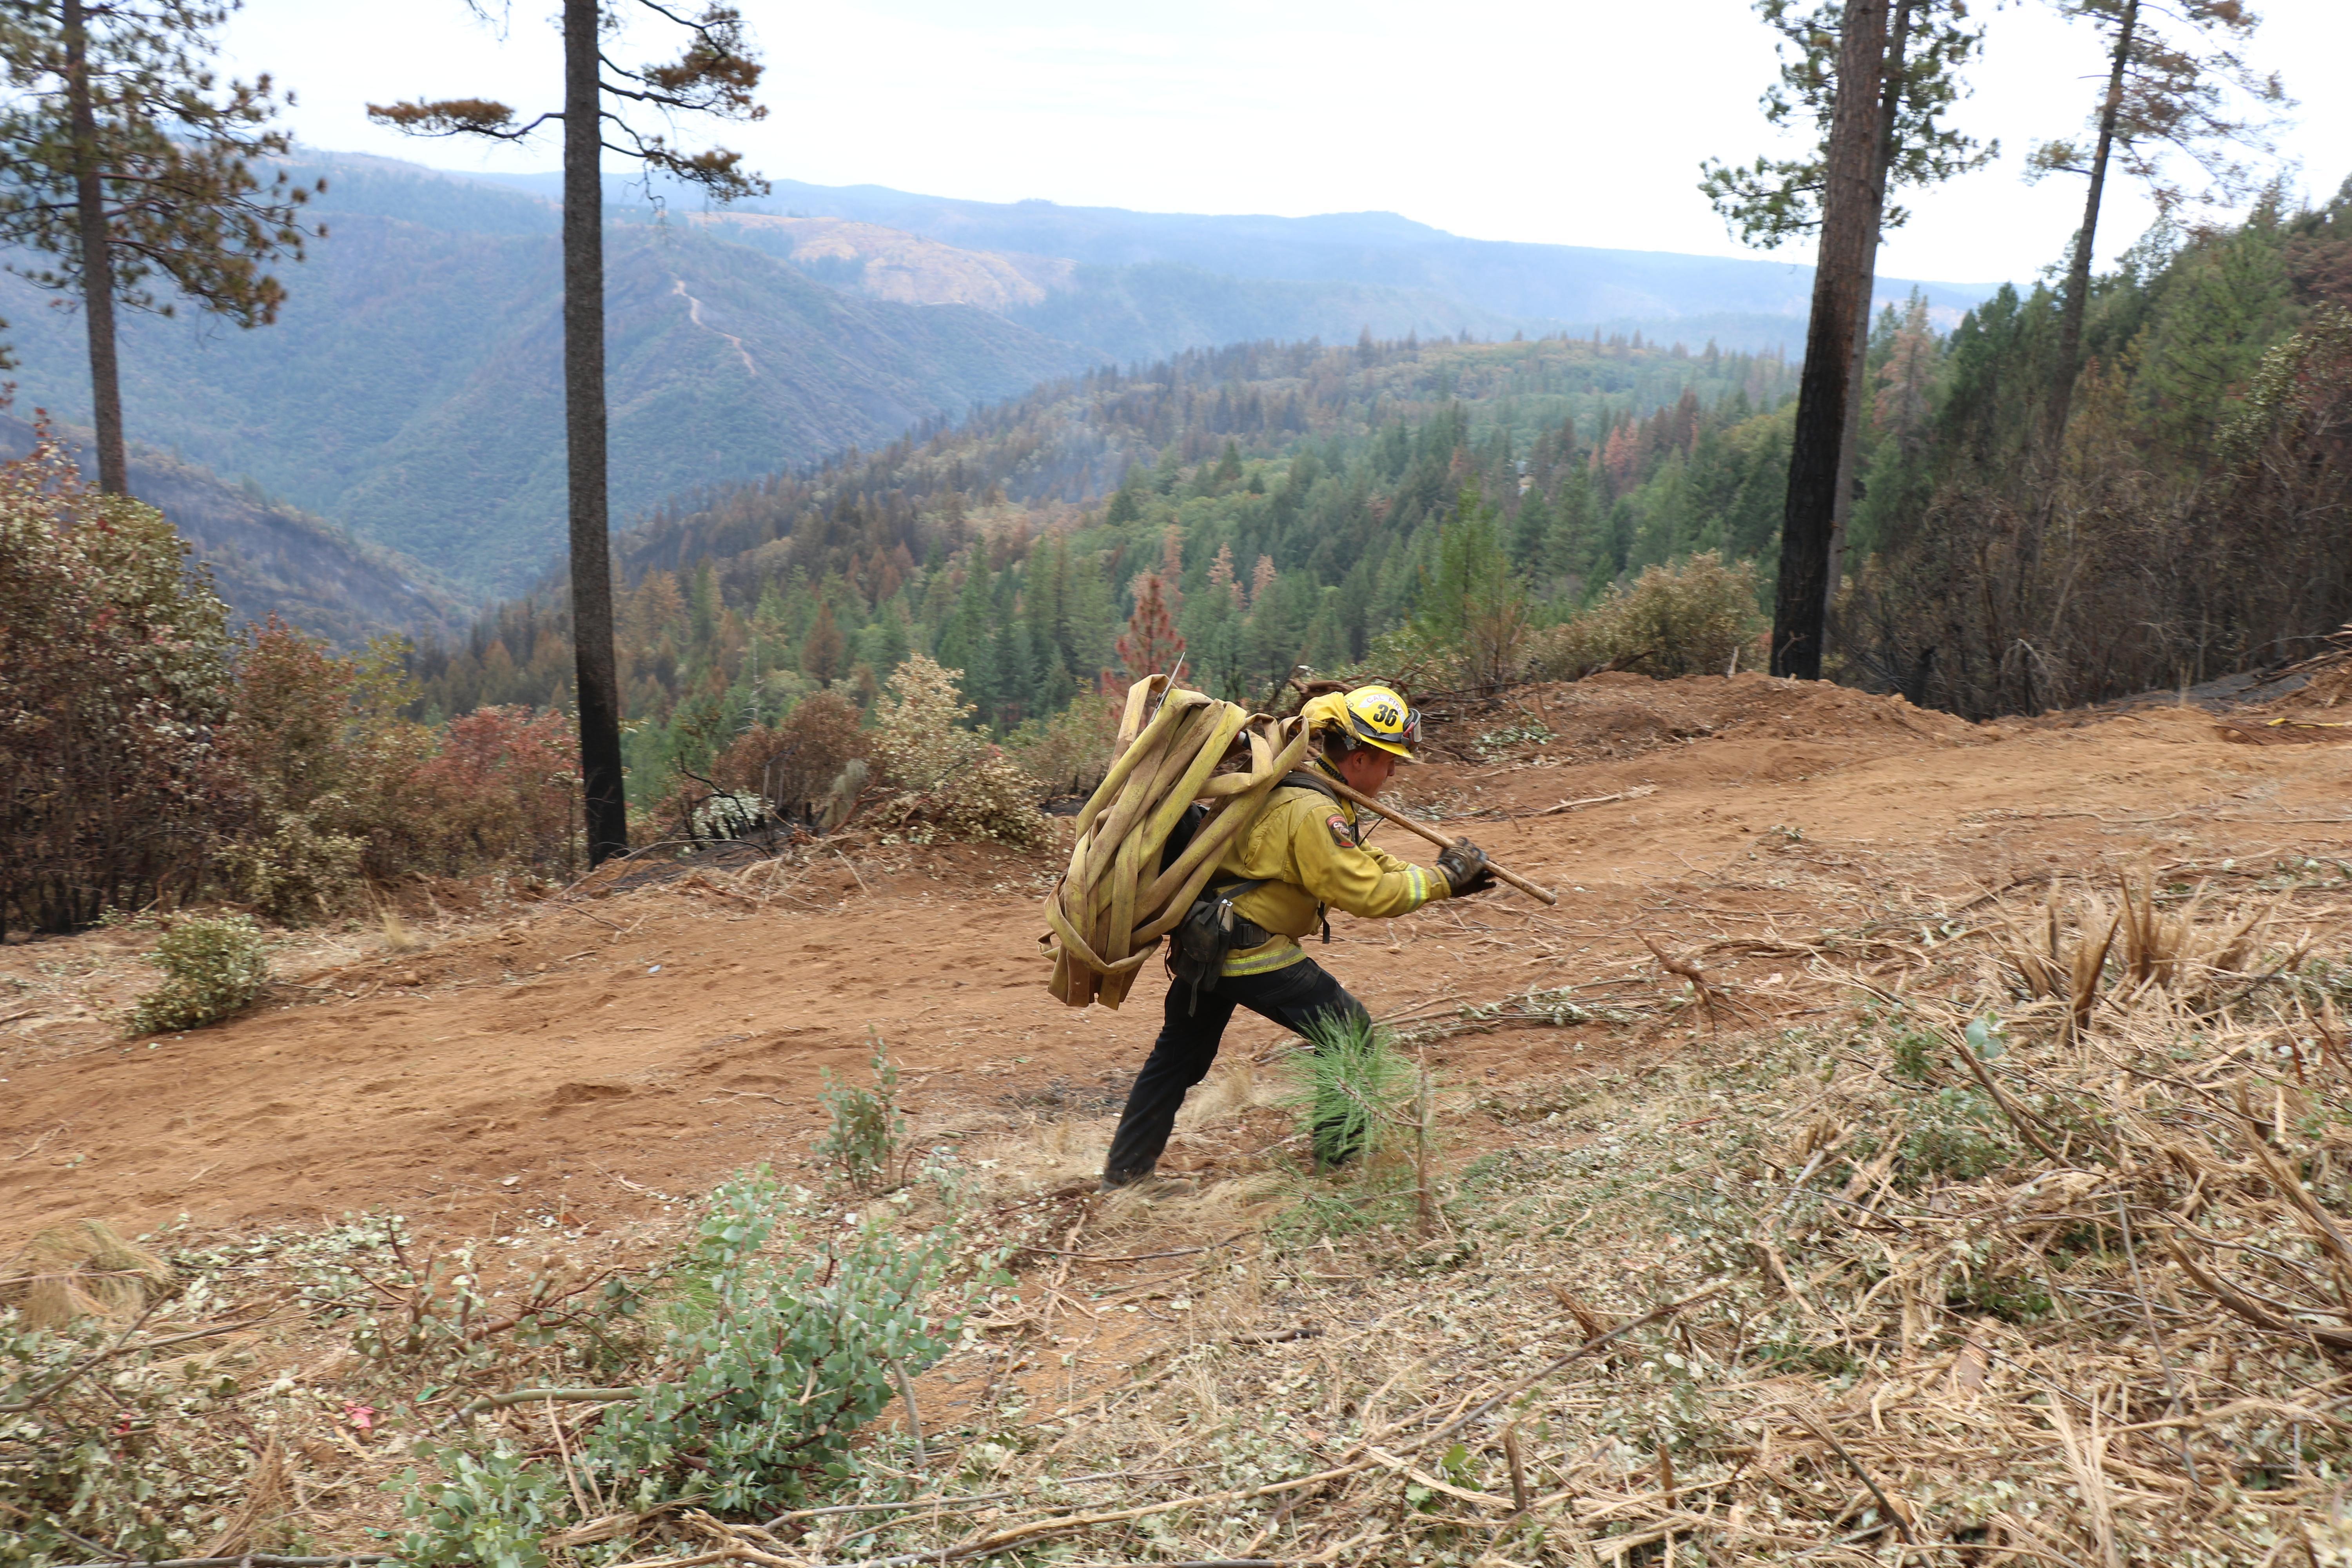 a male firefighter carries a large bundle of fire hose looped over a long wood tool handle that he rests on his shoulder. He walks on a wide dirt dozer line in an open clearing with forested mountains in the background